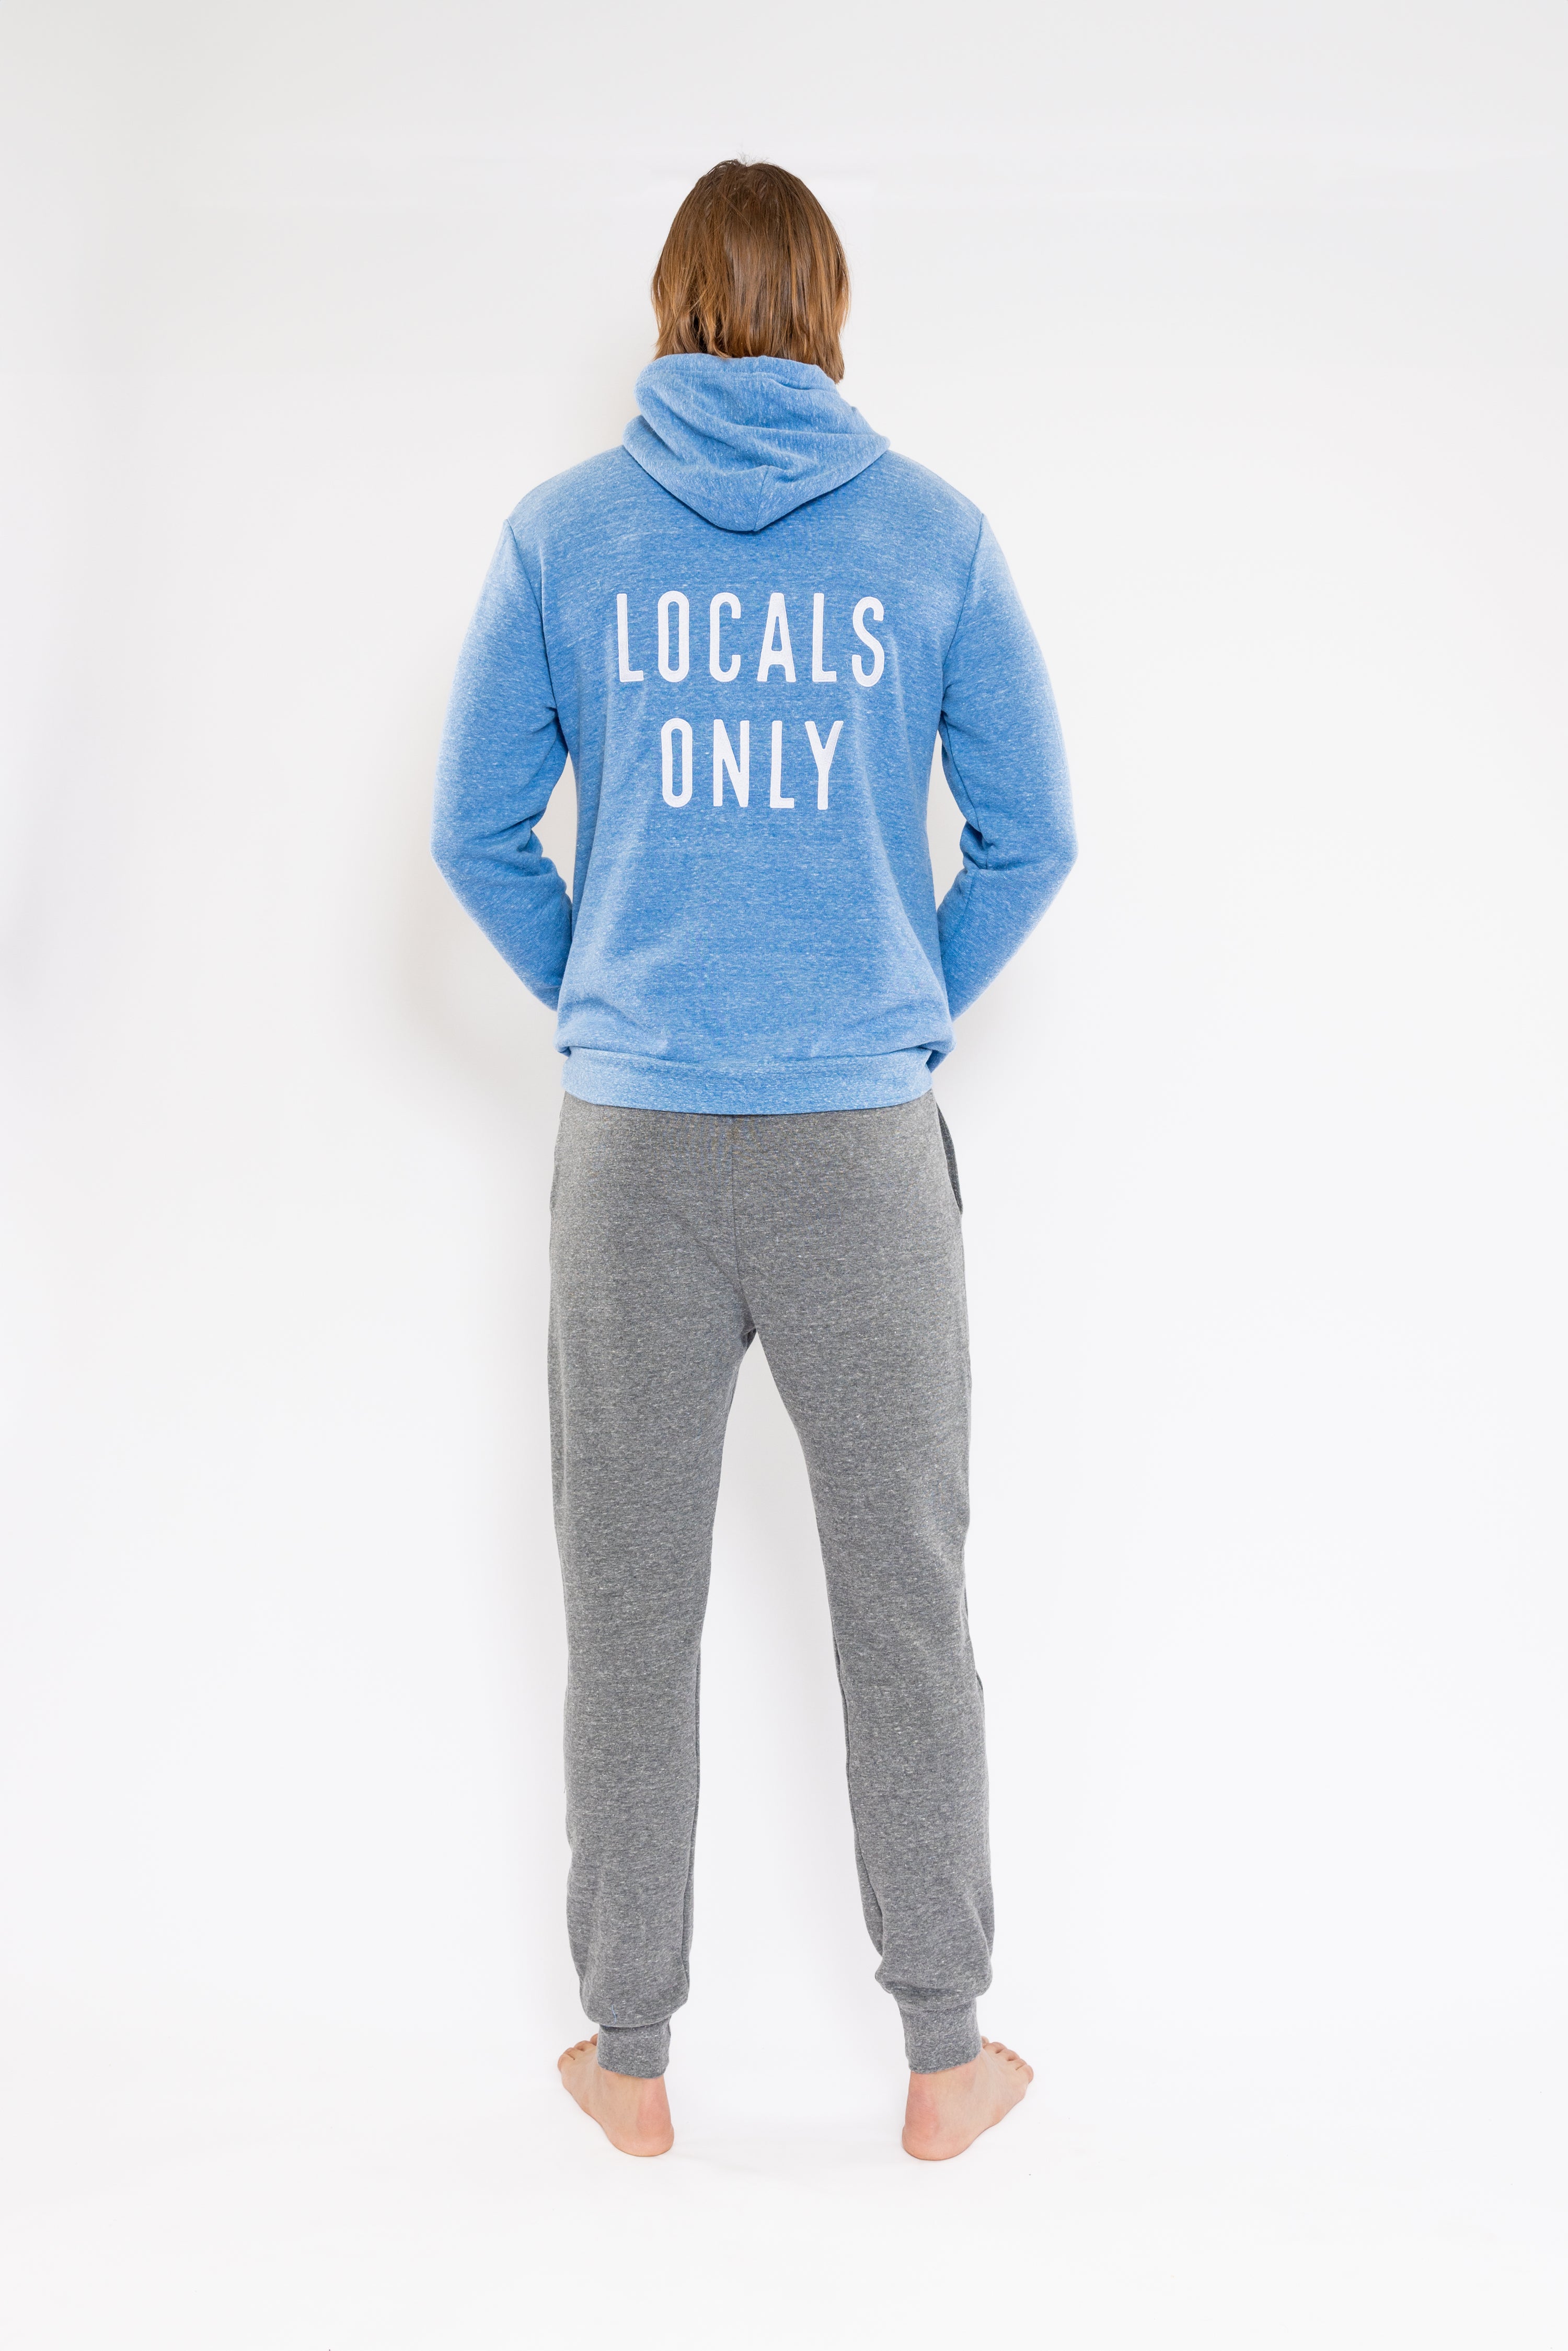 Strand Section Locals Only Pullover Hoodie